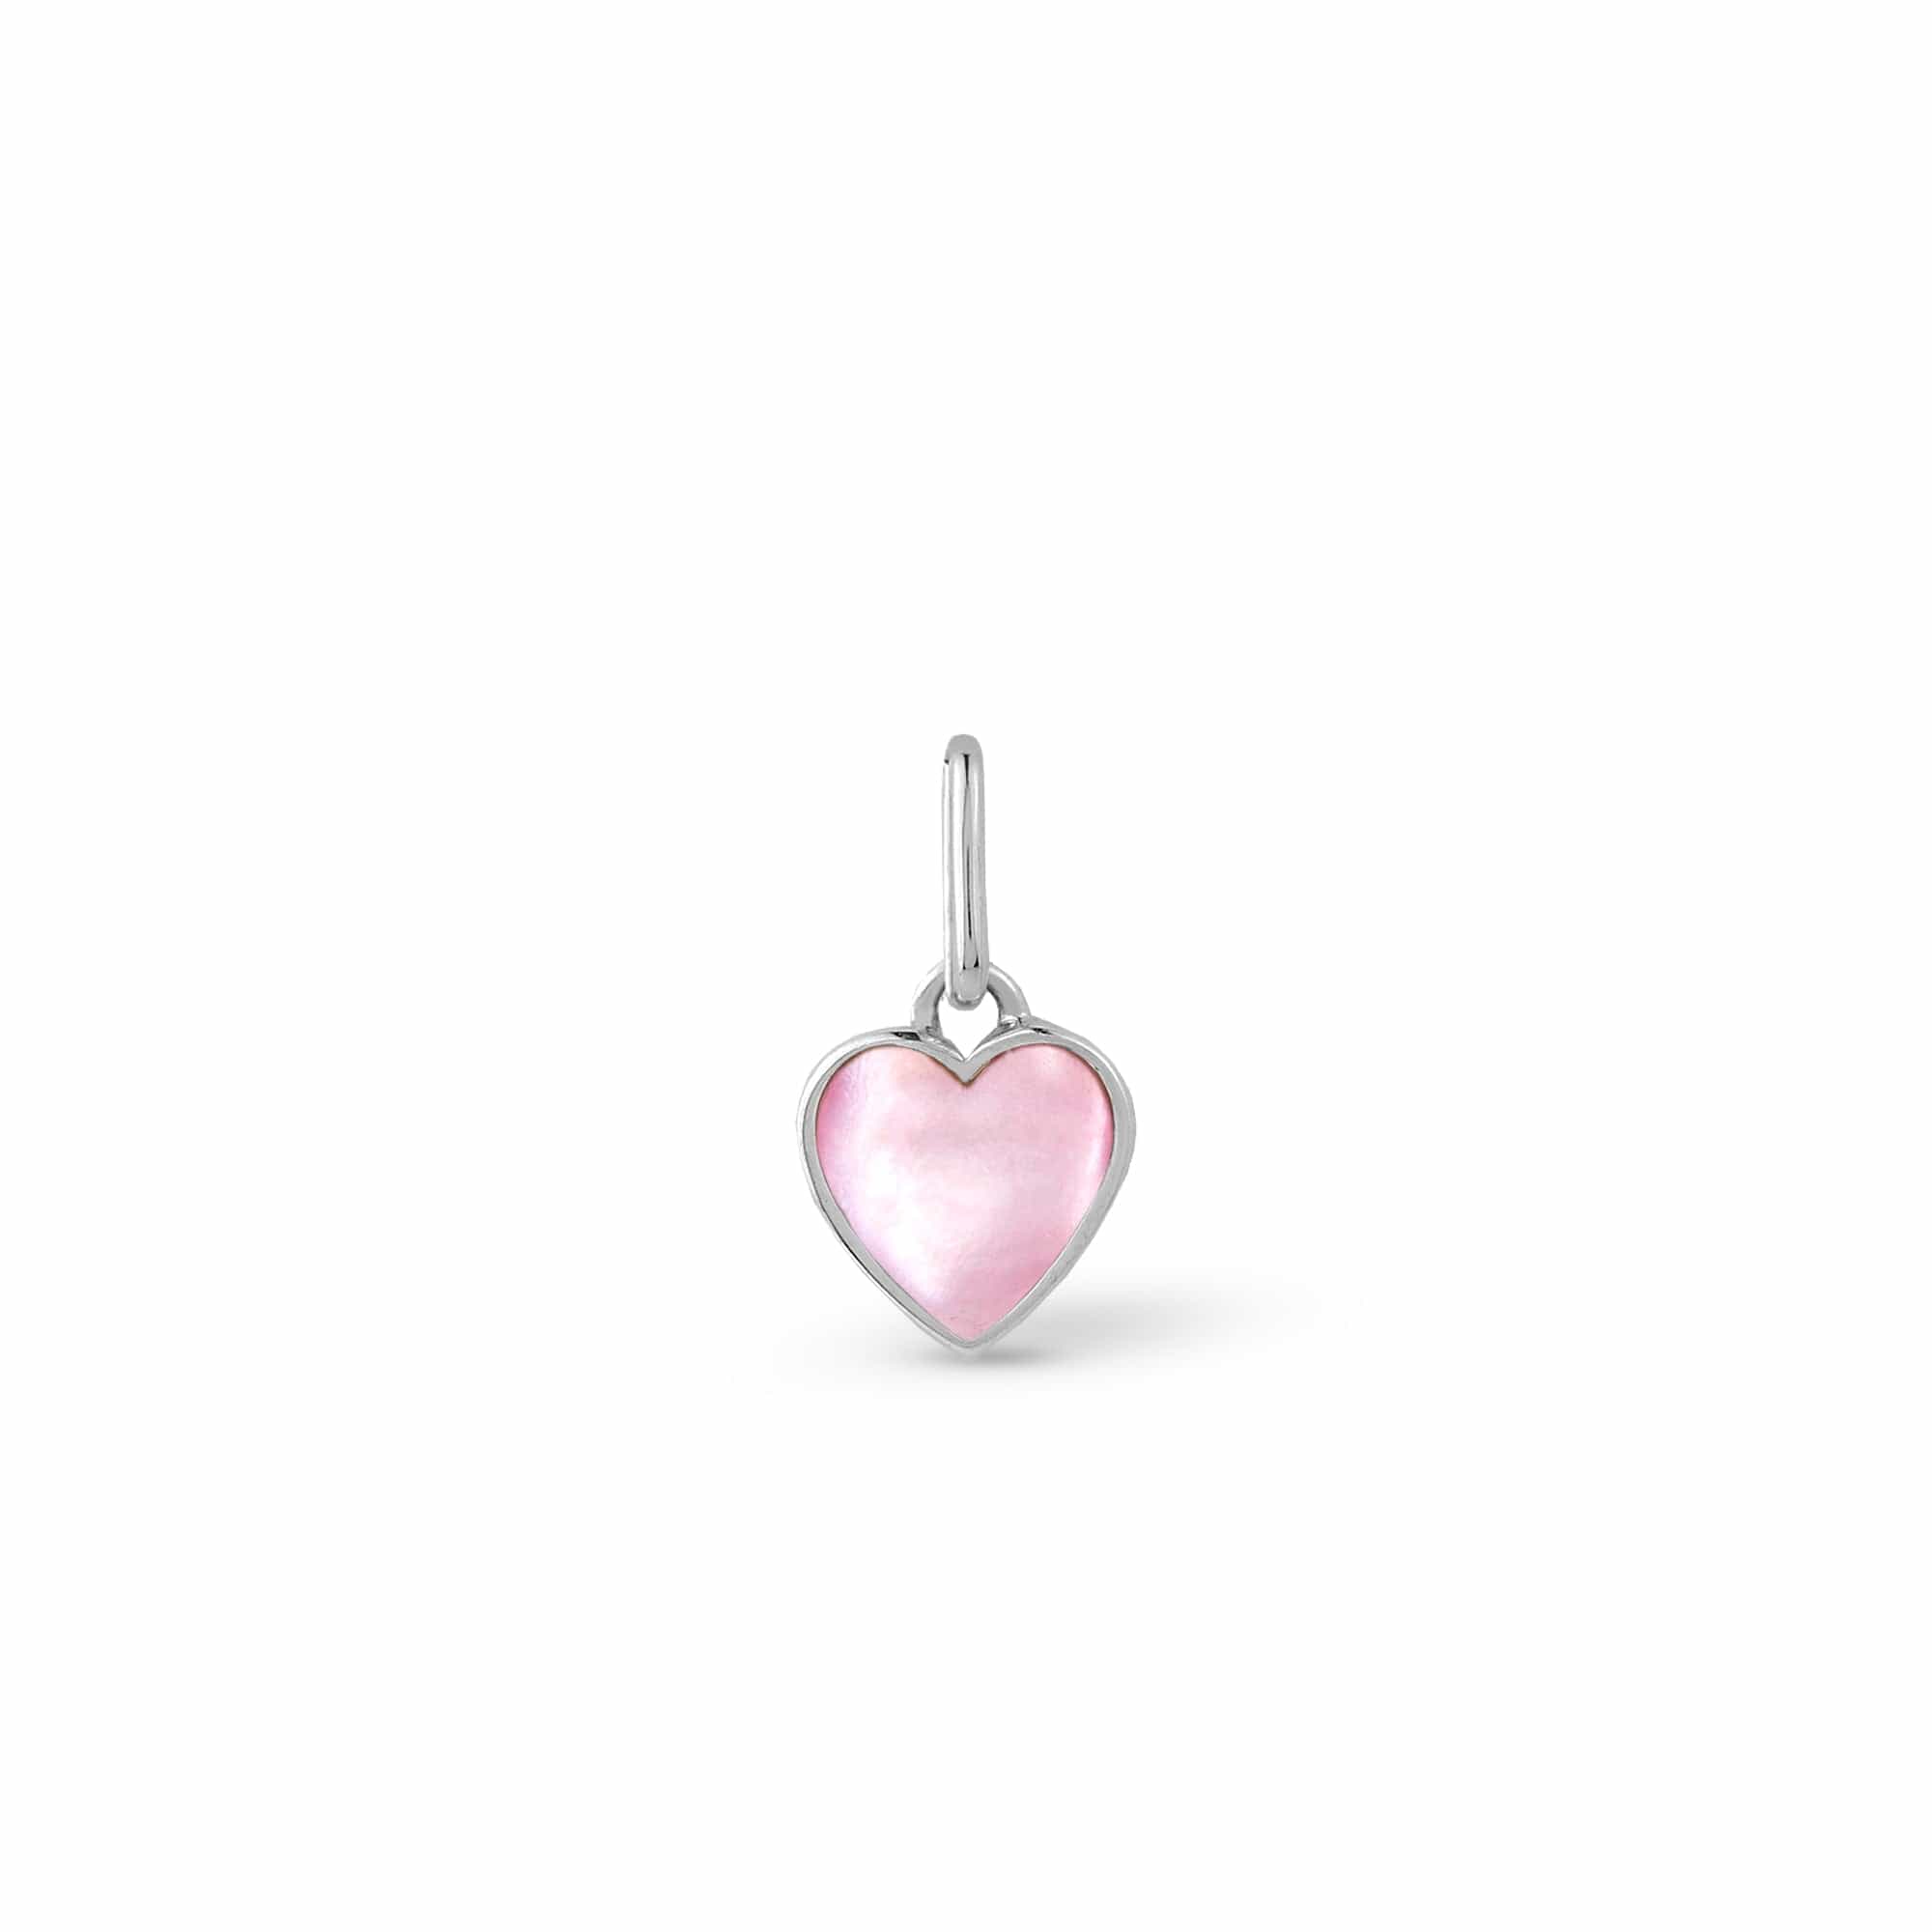 Boma Jewelry Necklaces Charm Only Take Heart Charm Necklace